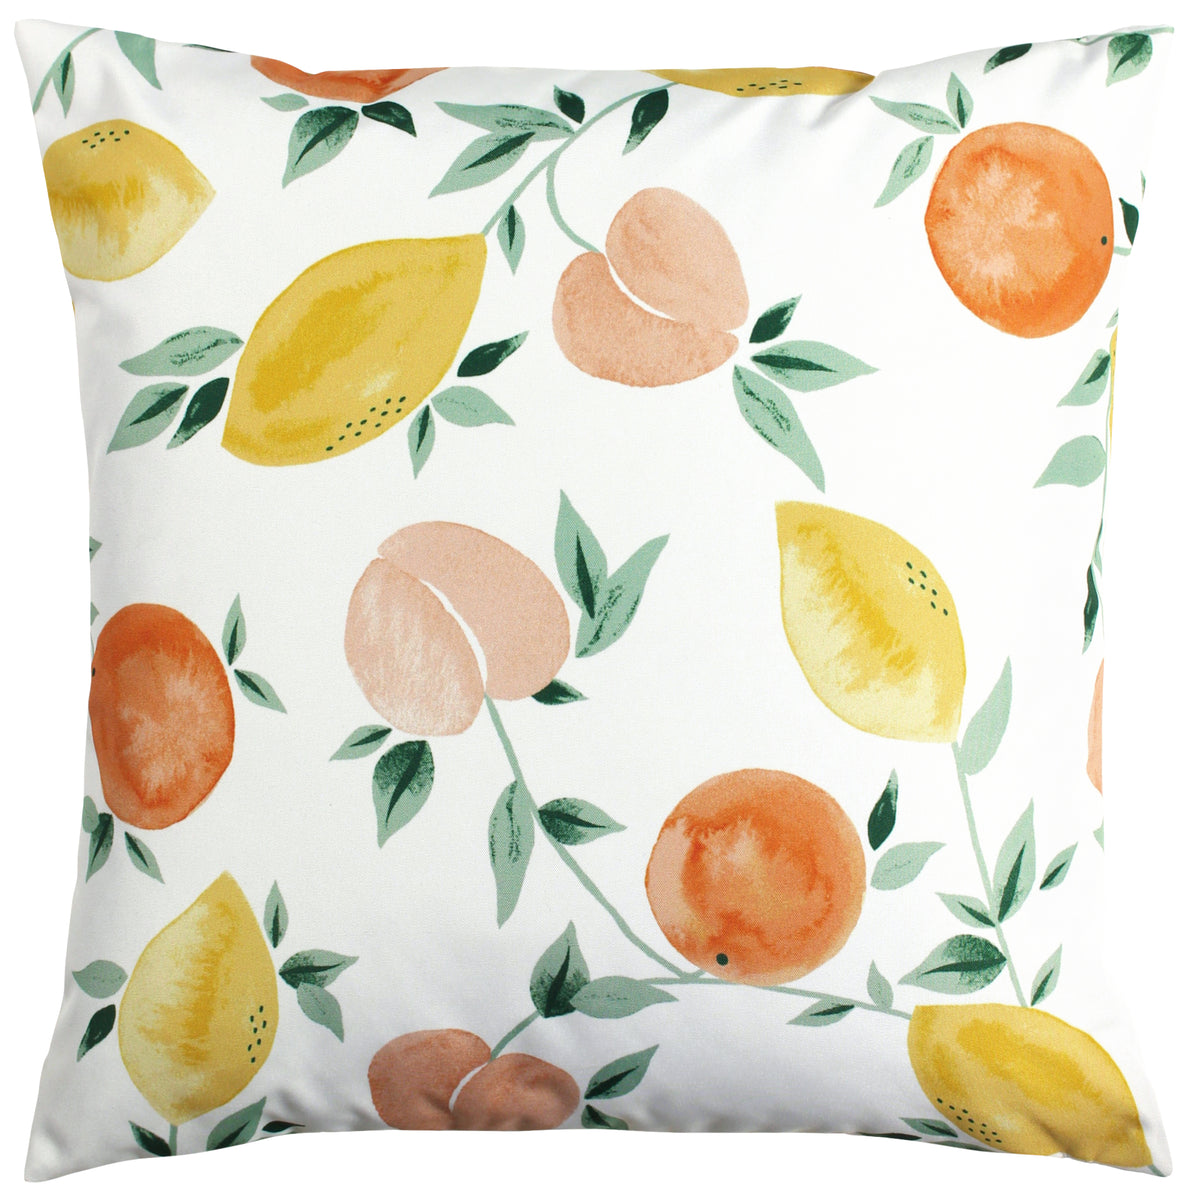 Les Fruits 43cm Reversible Outdoor Polyester Cushion